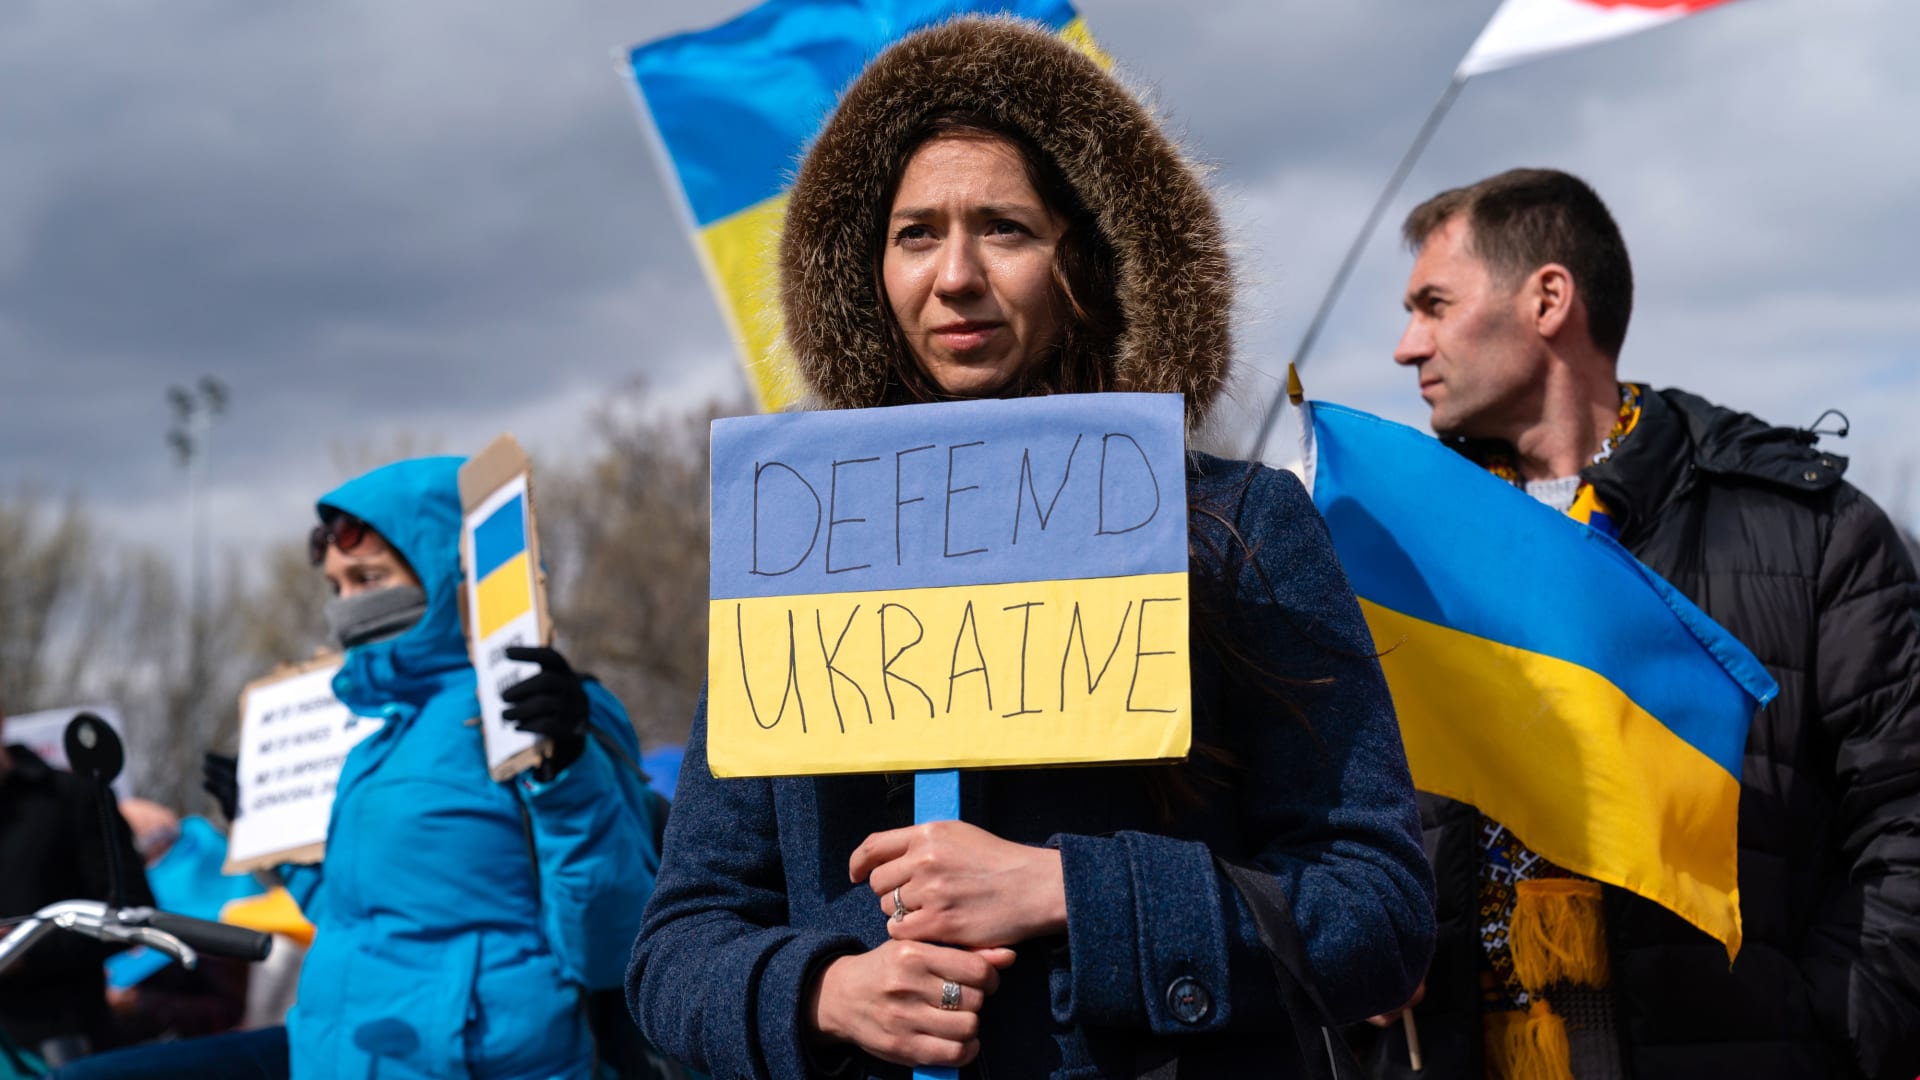 A rally against Russia's invasion of Ukraine on the National Mall in Washington, D.C., on Sunday, March 27, 2022.